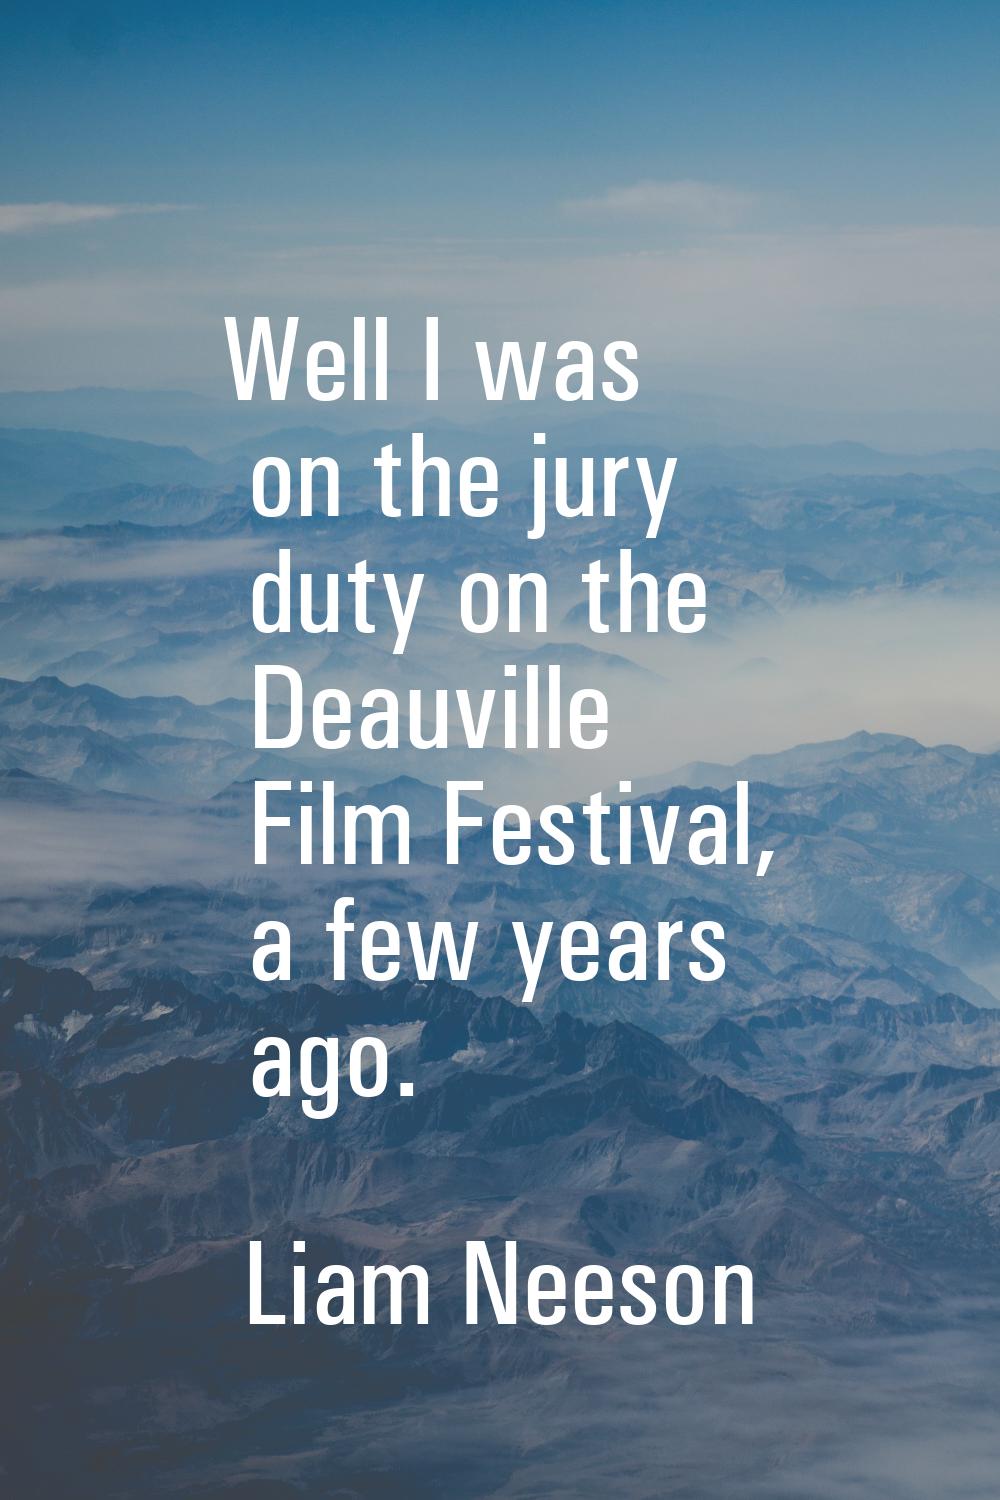 Well I was on the jury duty on the Deauville Film Festival, a few years ago.